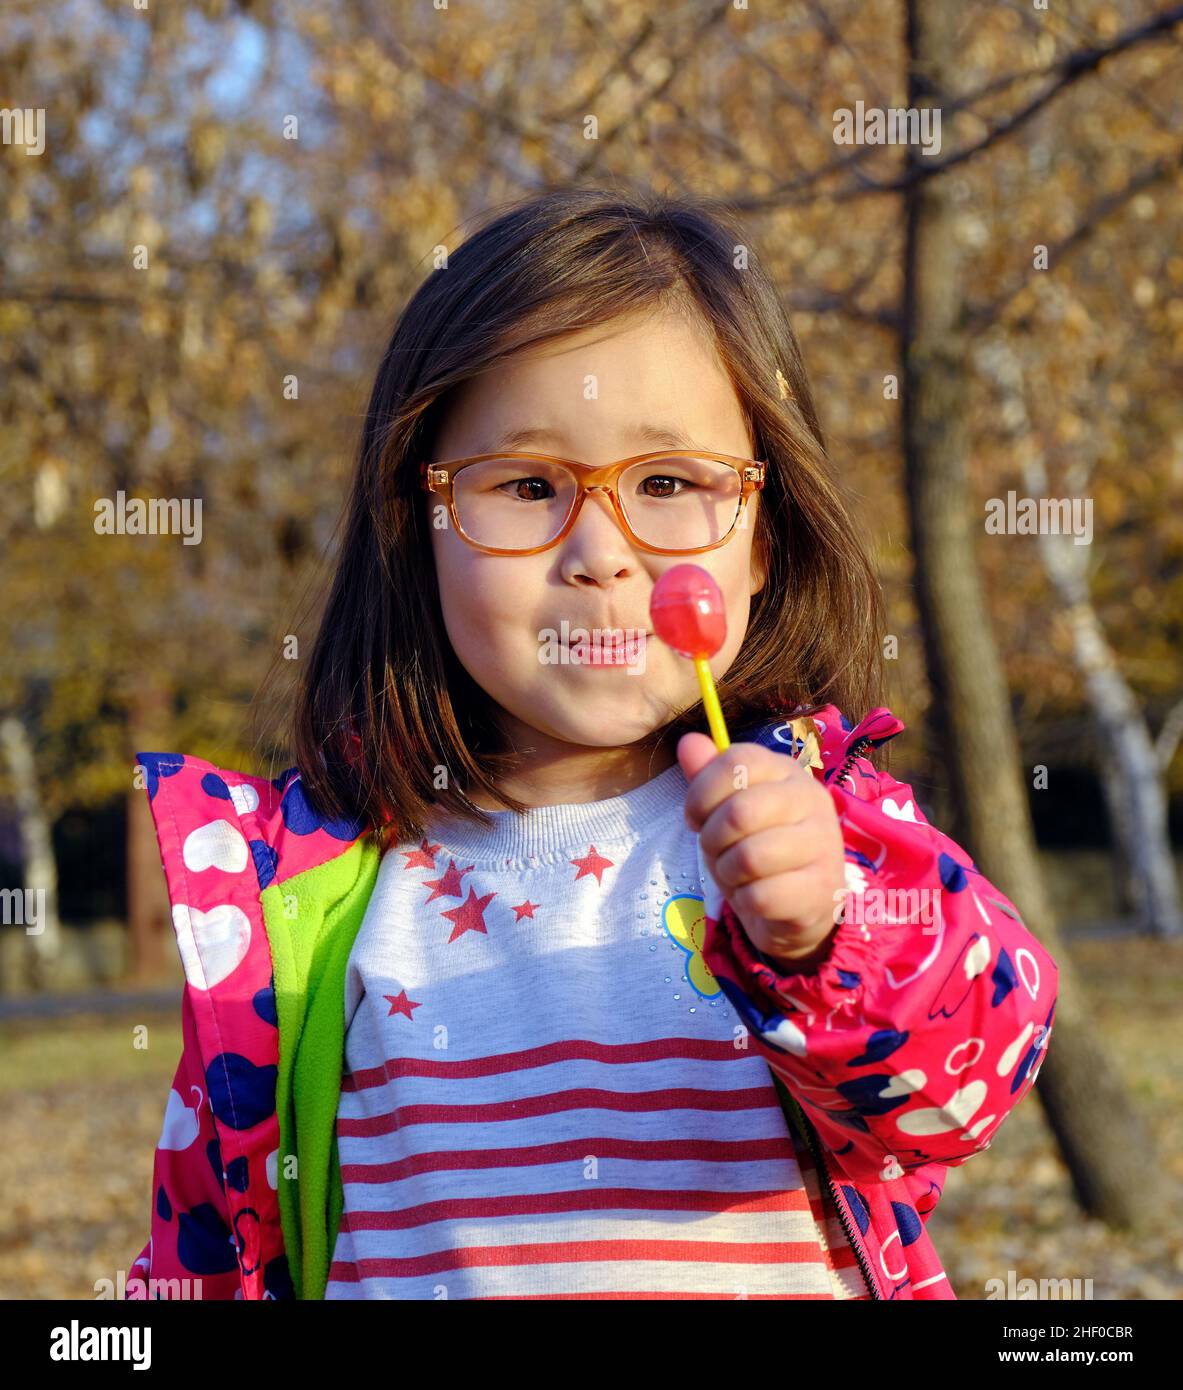 Almaty, Kazakhstan - October 22, 2020: cute girl in trendy clothes looking at lollipop candy Stock Photo